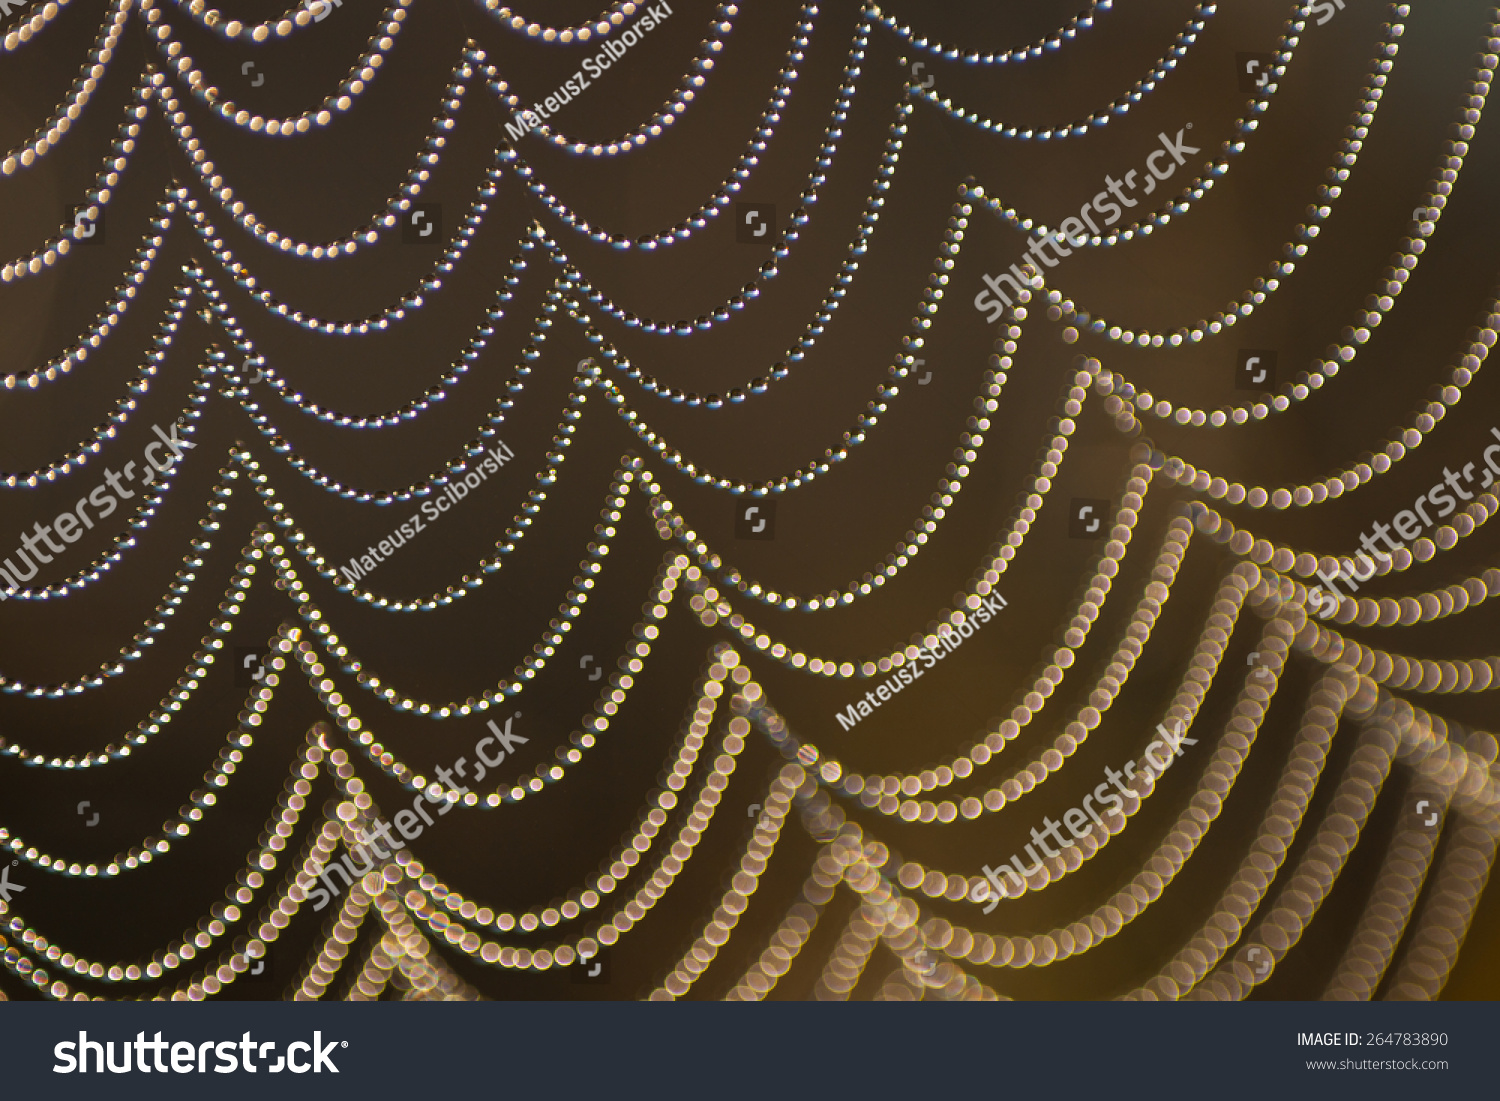 spider web with dew drops - Royalty Free Stock Photo 264783890 - Avopix.com